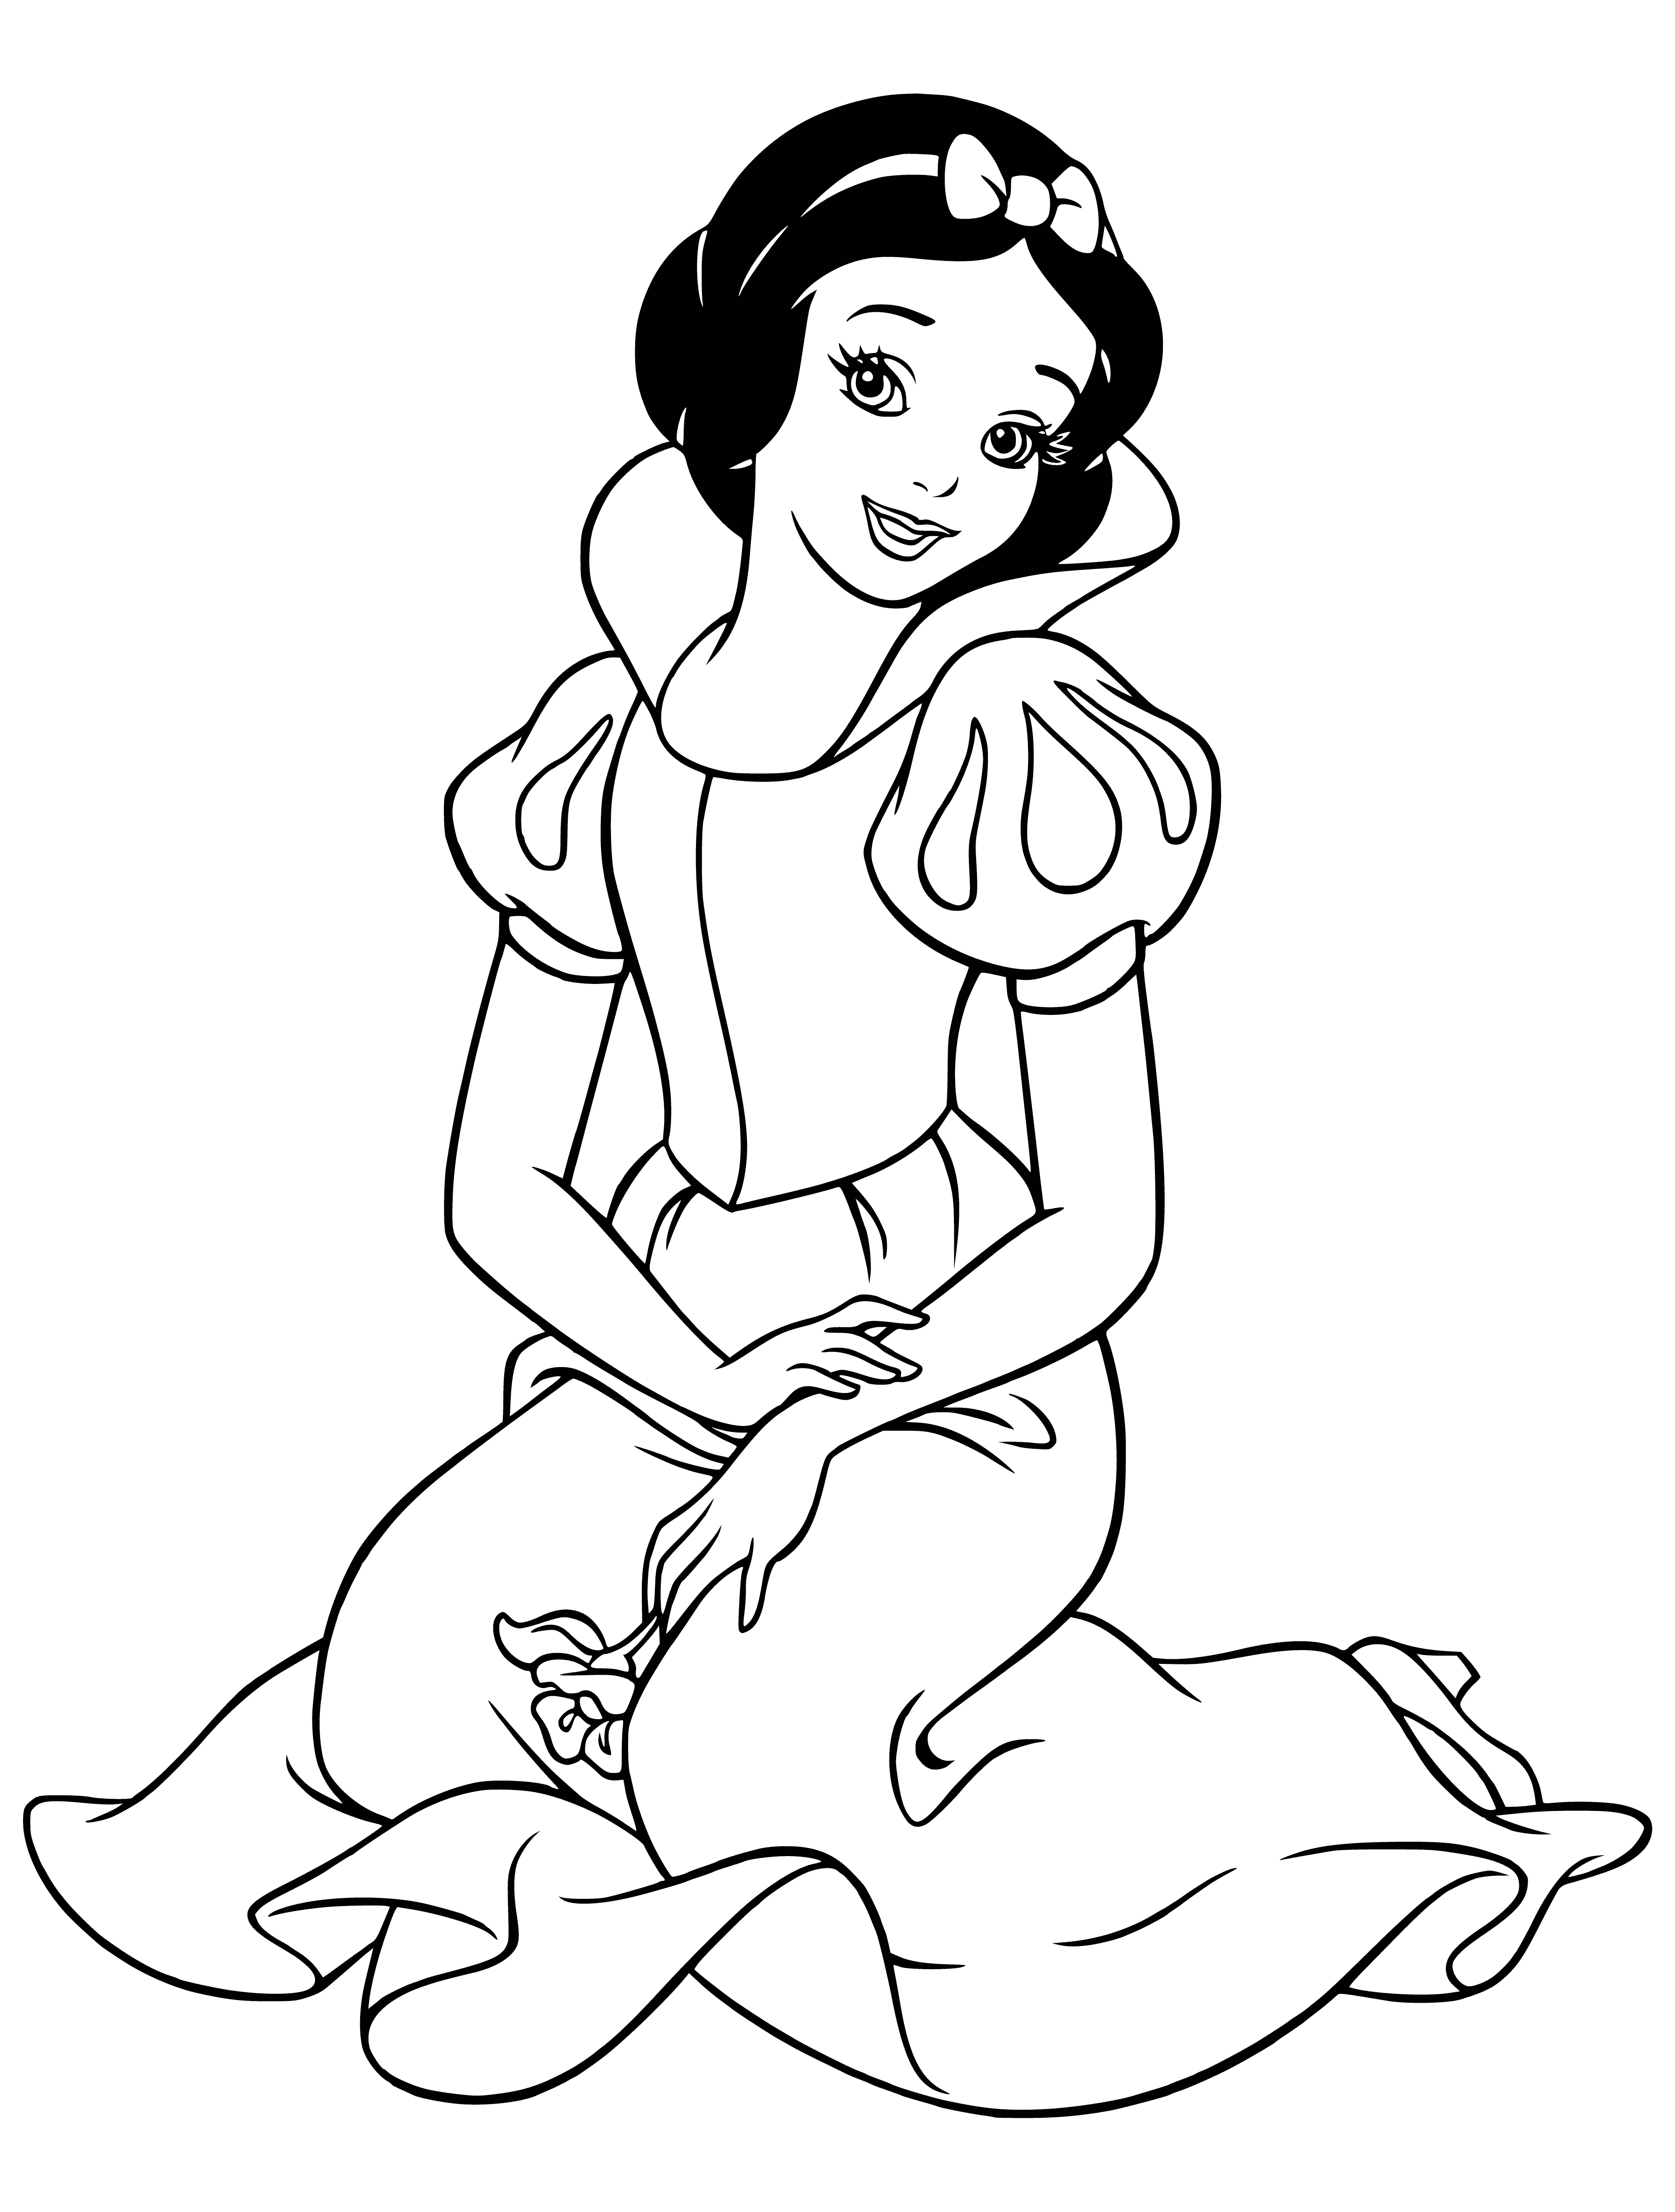 coloring page: Snow White is in a blue and white dress with a red bow, with black curly hair. She is surrounded by seven small men in red and white hats with beards.